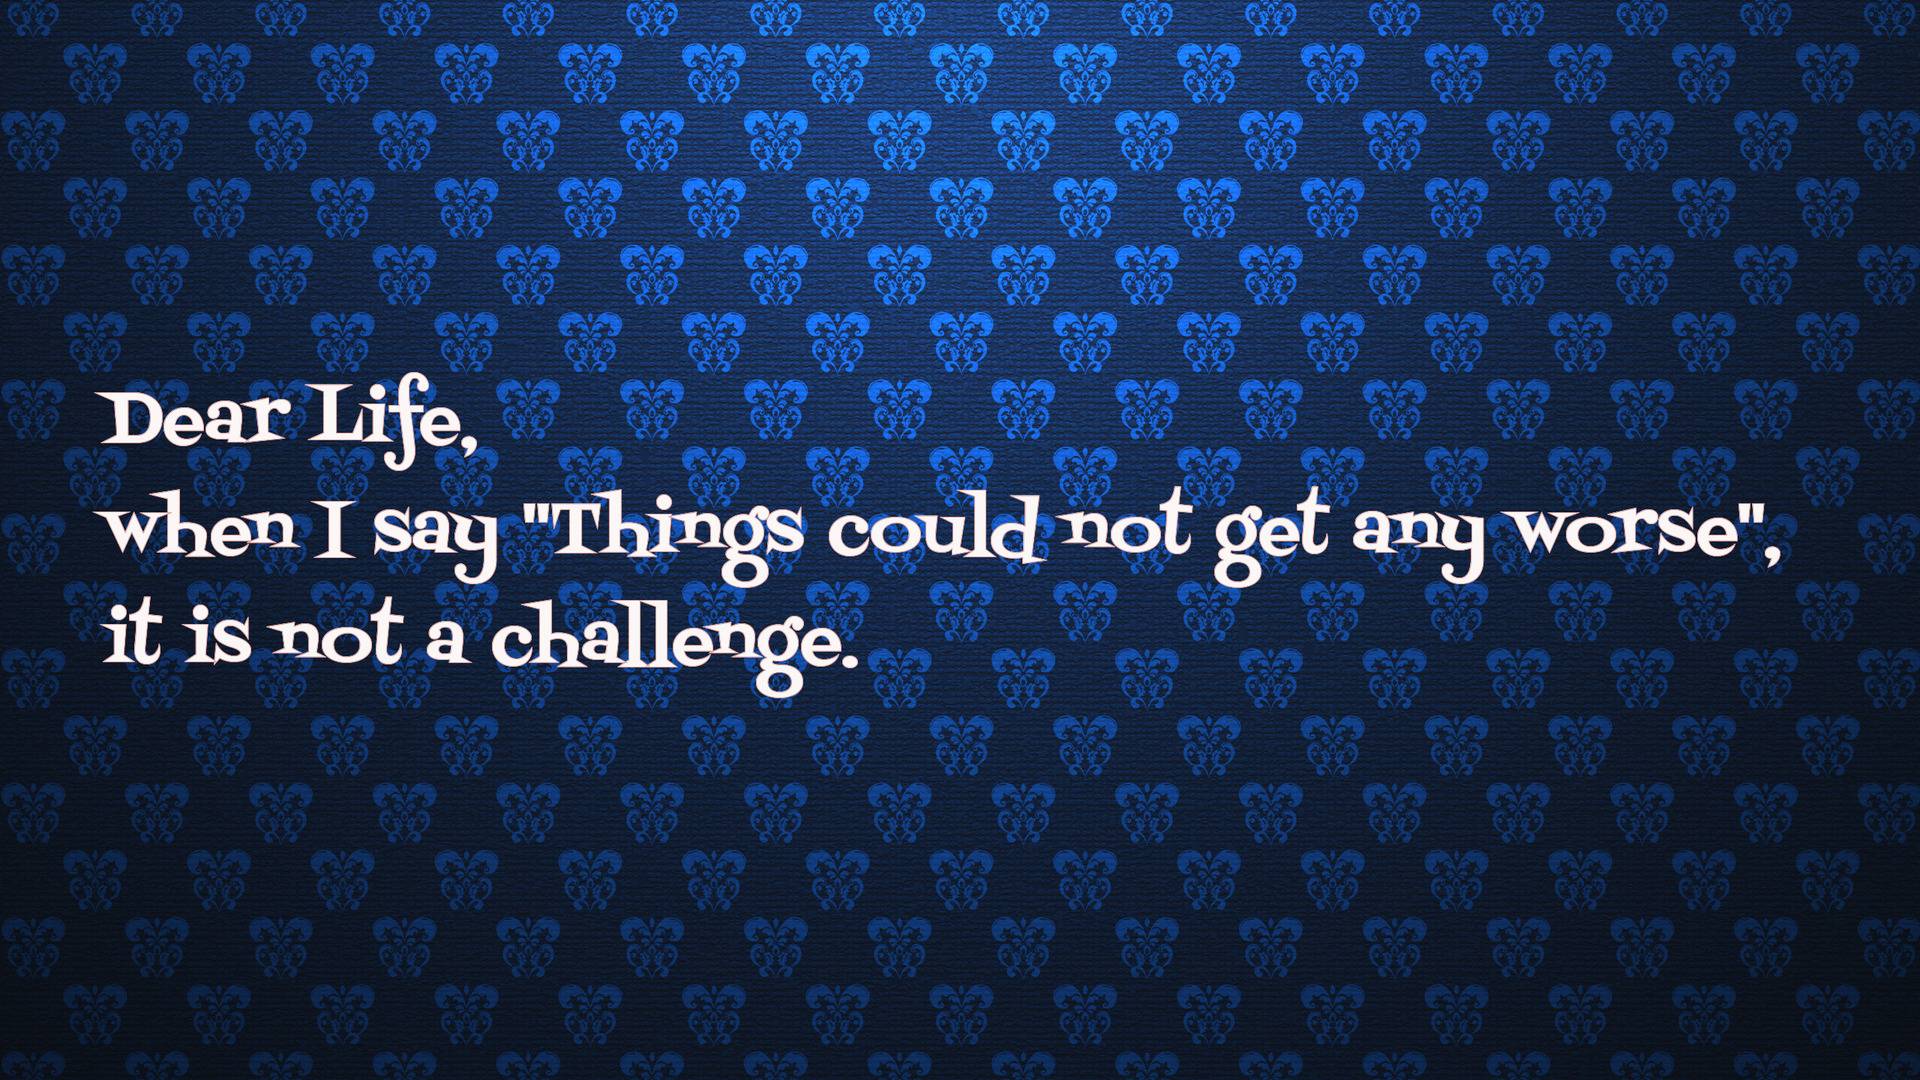 Motivational Wallpaper on Life: Dear life, When i say things could